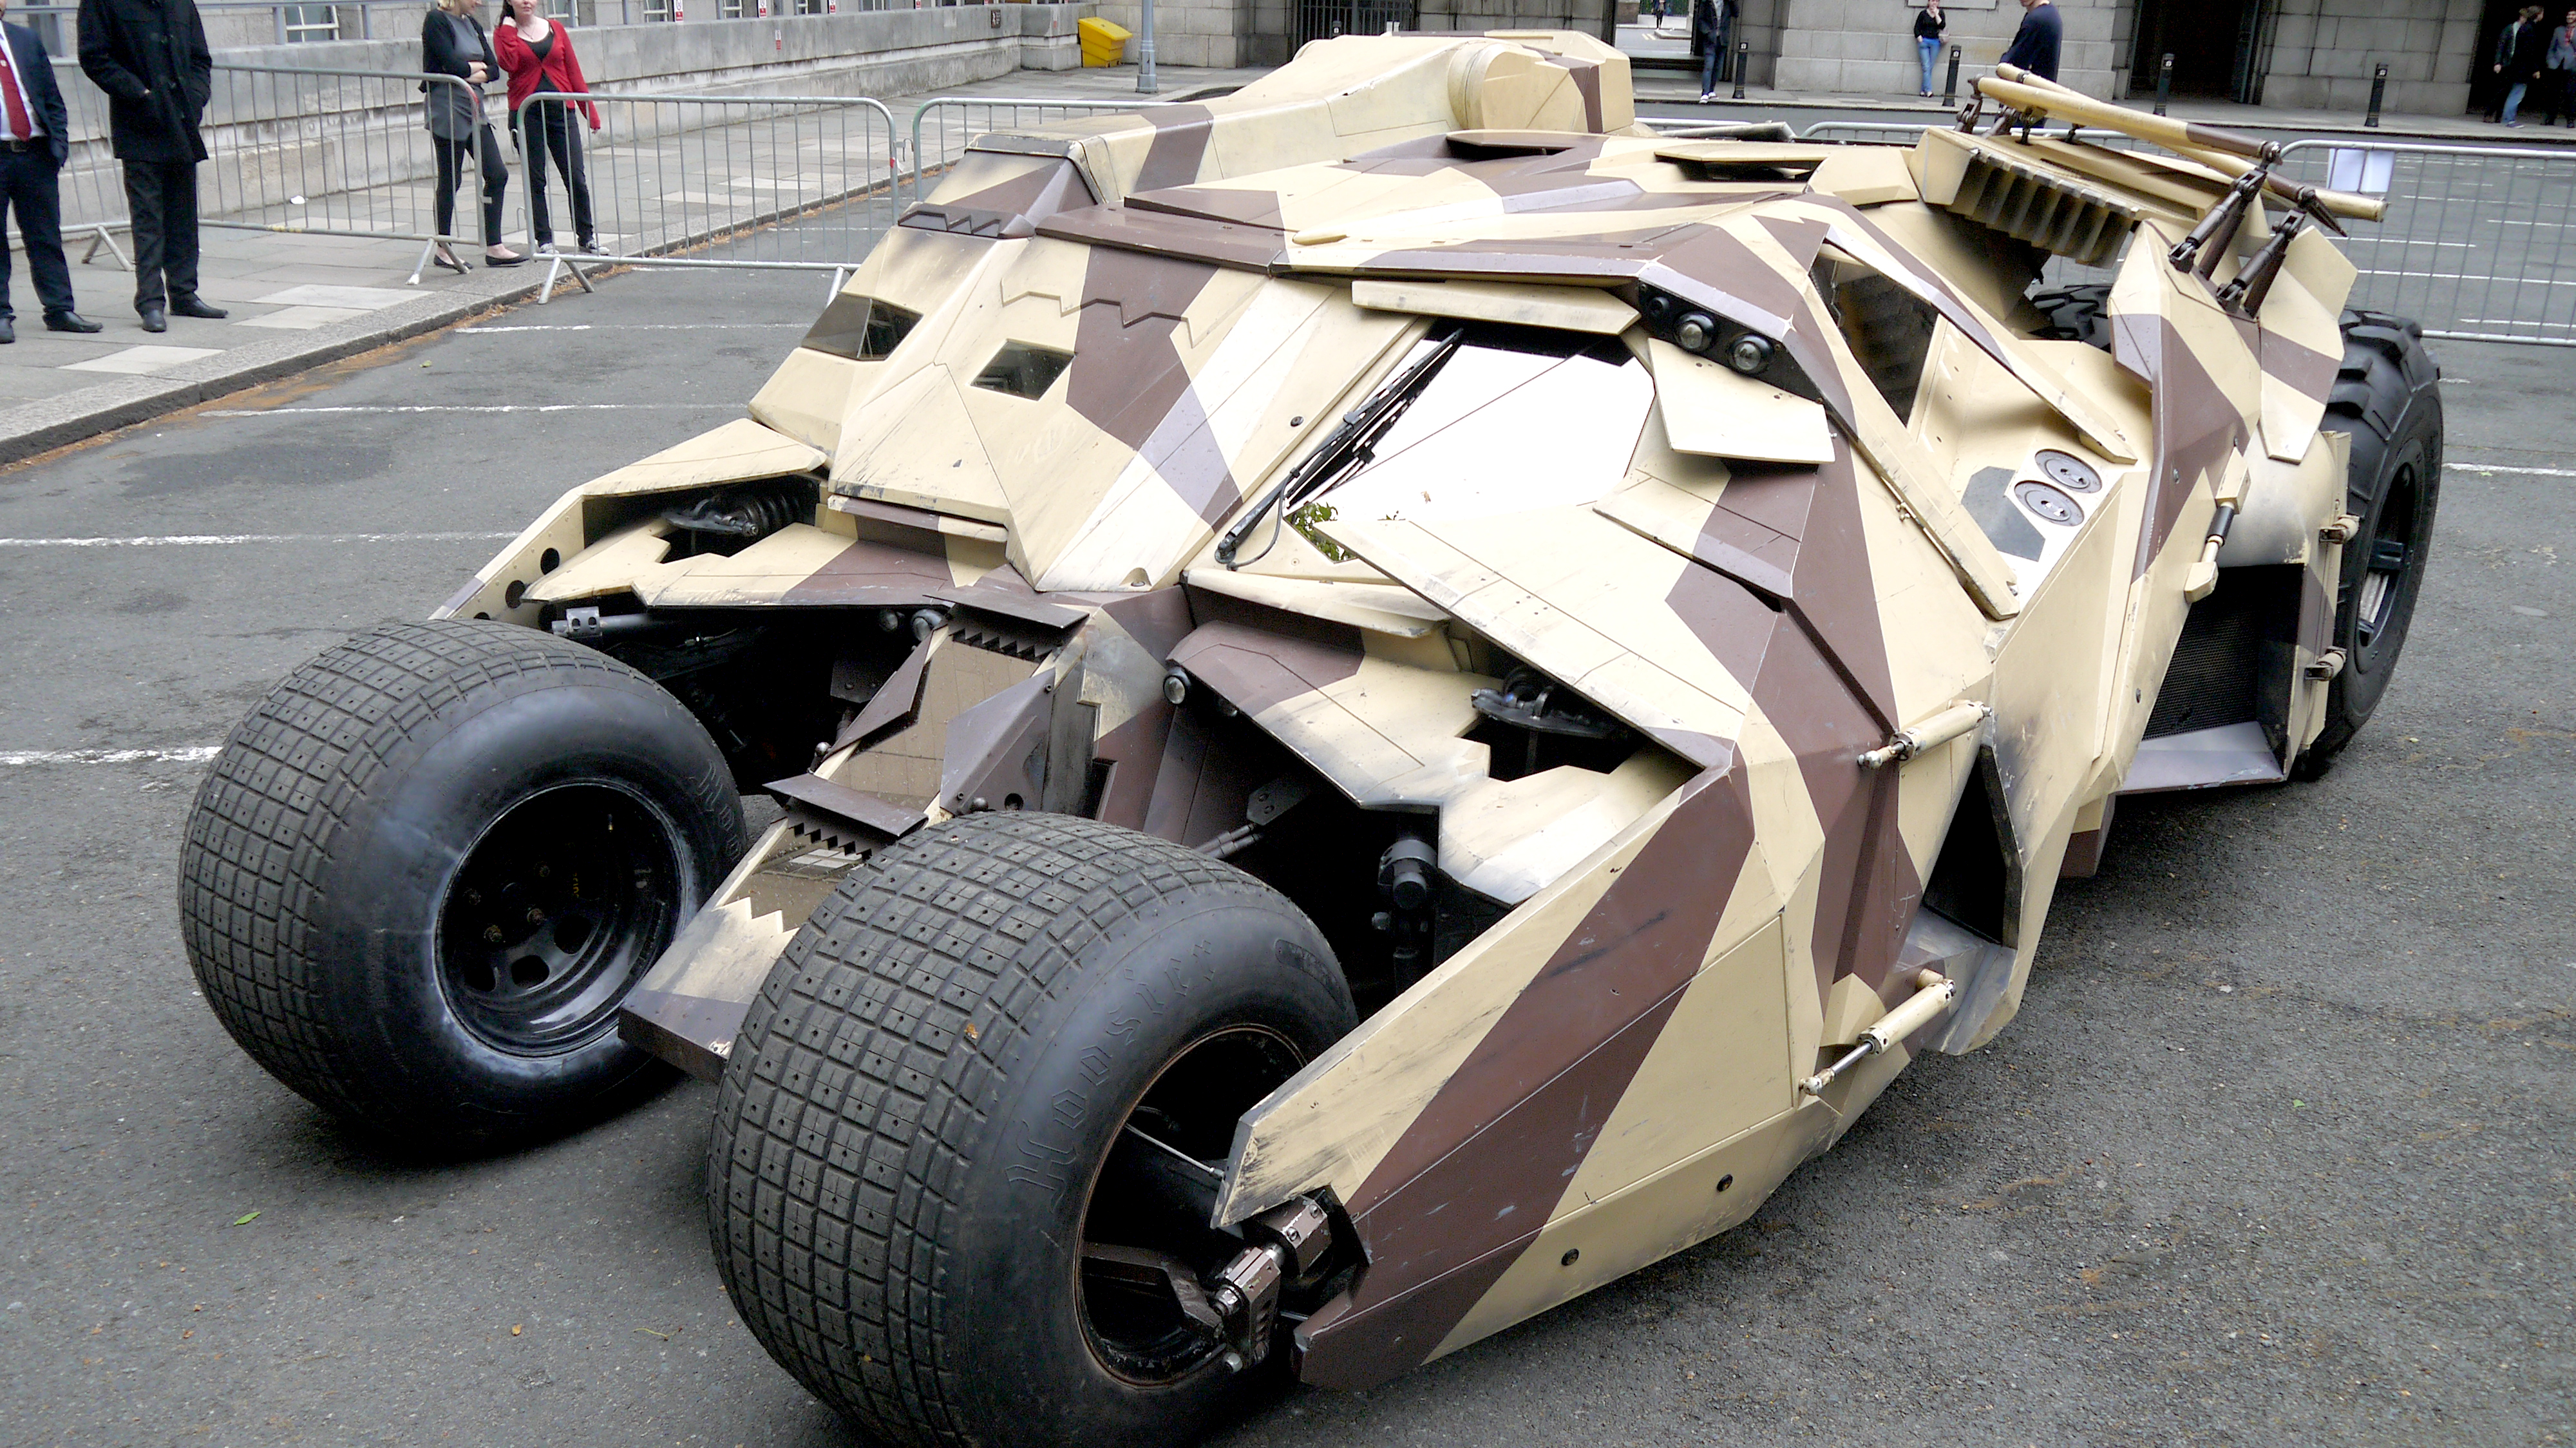 Snavset At regere vedvarende ressource The technology of the Tumbler - how Britain made the Dark Knight mobile |  TechRadar